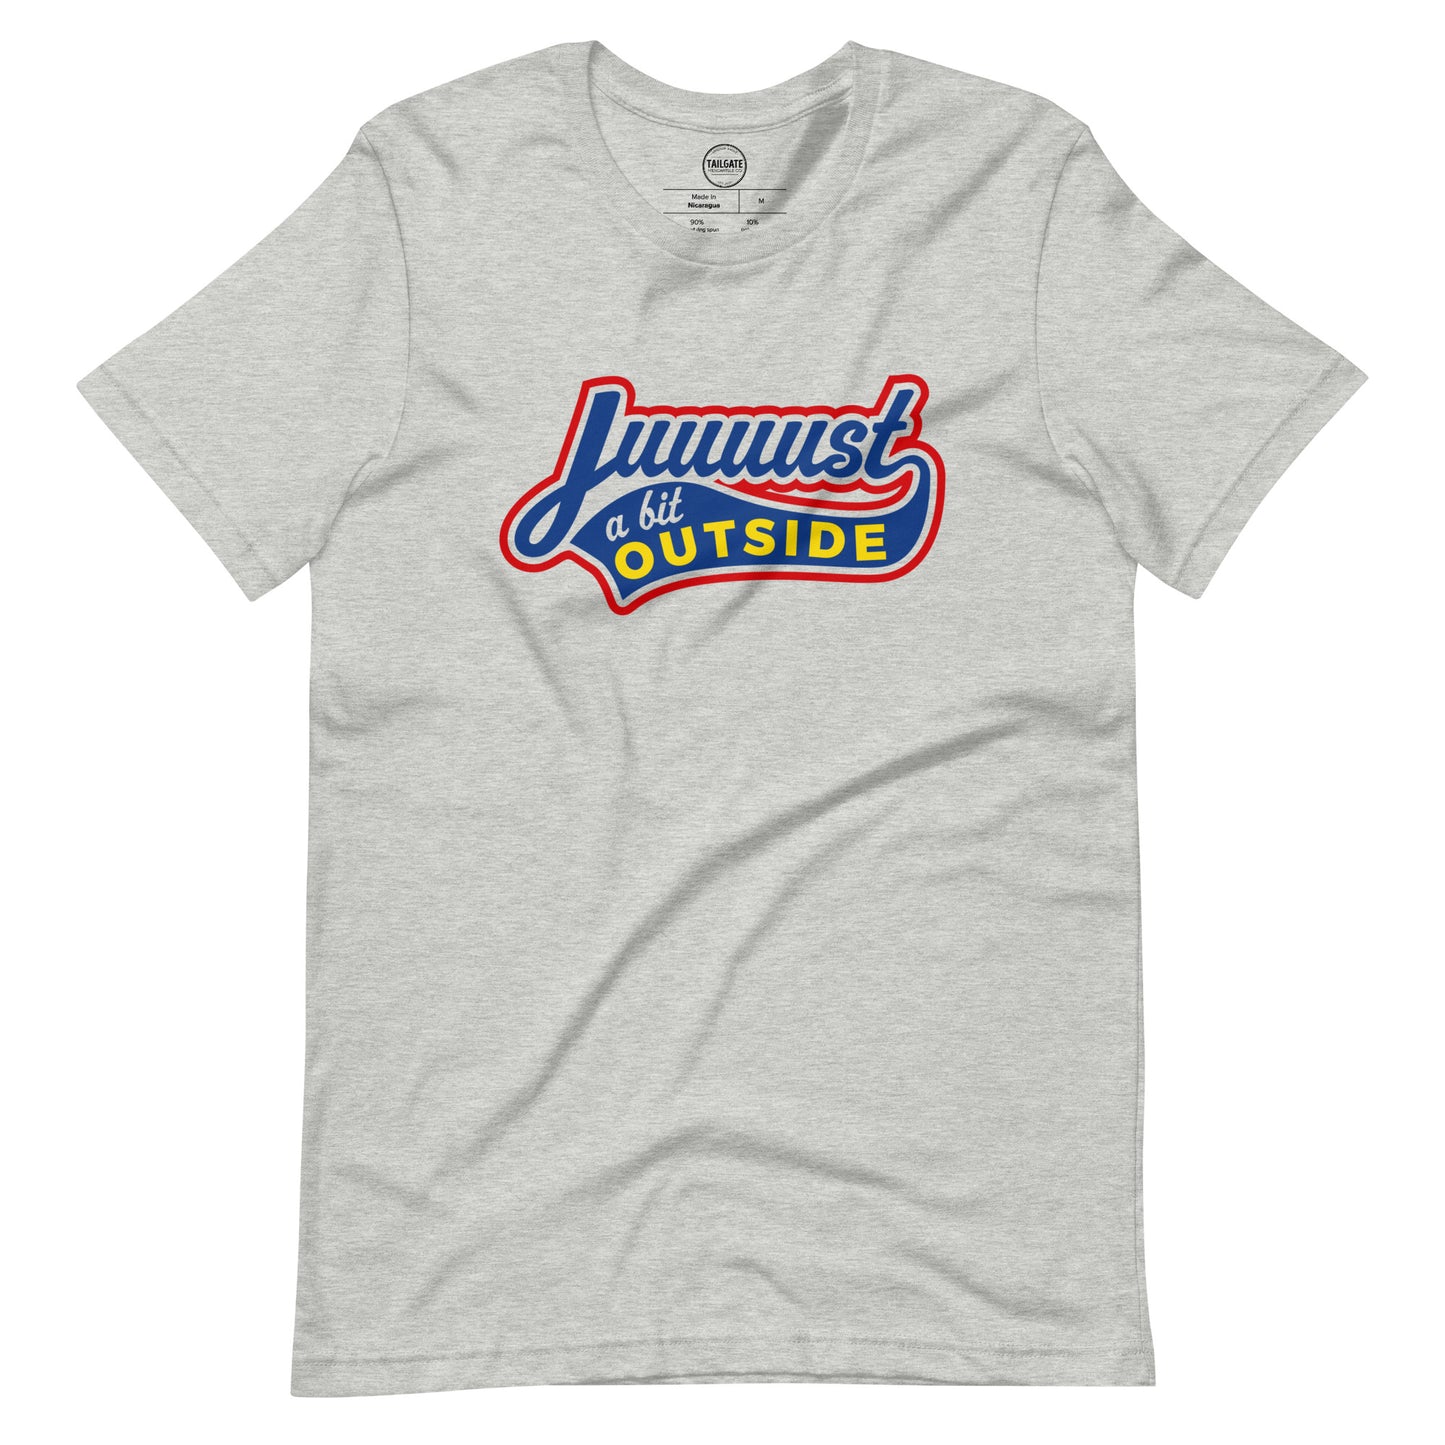 Image of heather athletic grey t-shirt with design of "Juuuust a bit Outside" in blue/red/yellow located on centre chest. Just a Bit Outside is an homage to the great baseball movie "Major League". This design is exclusive to Tailgate Mercantile and available only online.